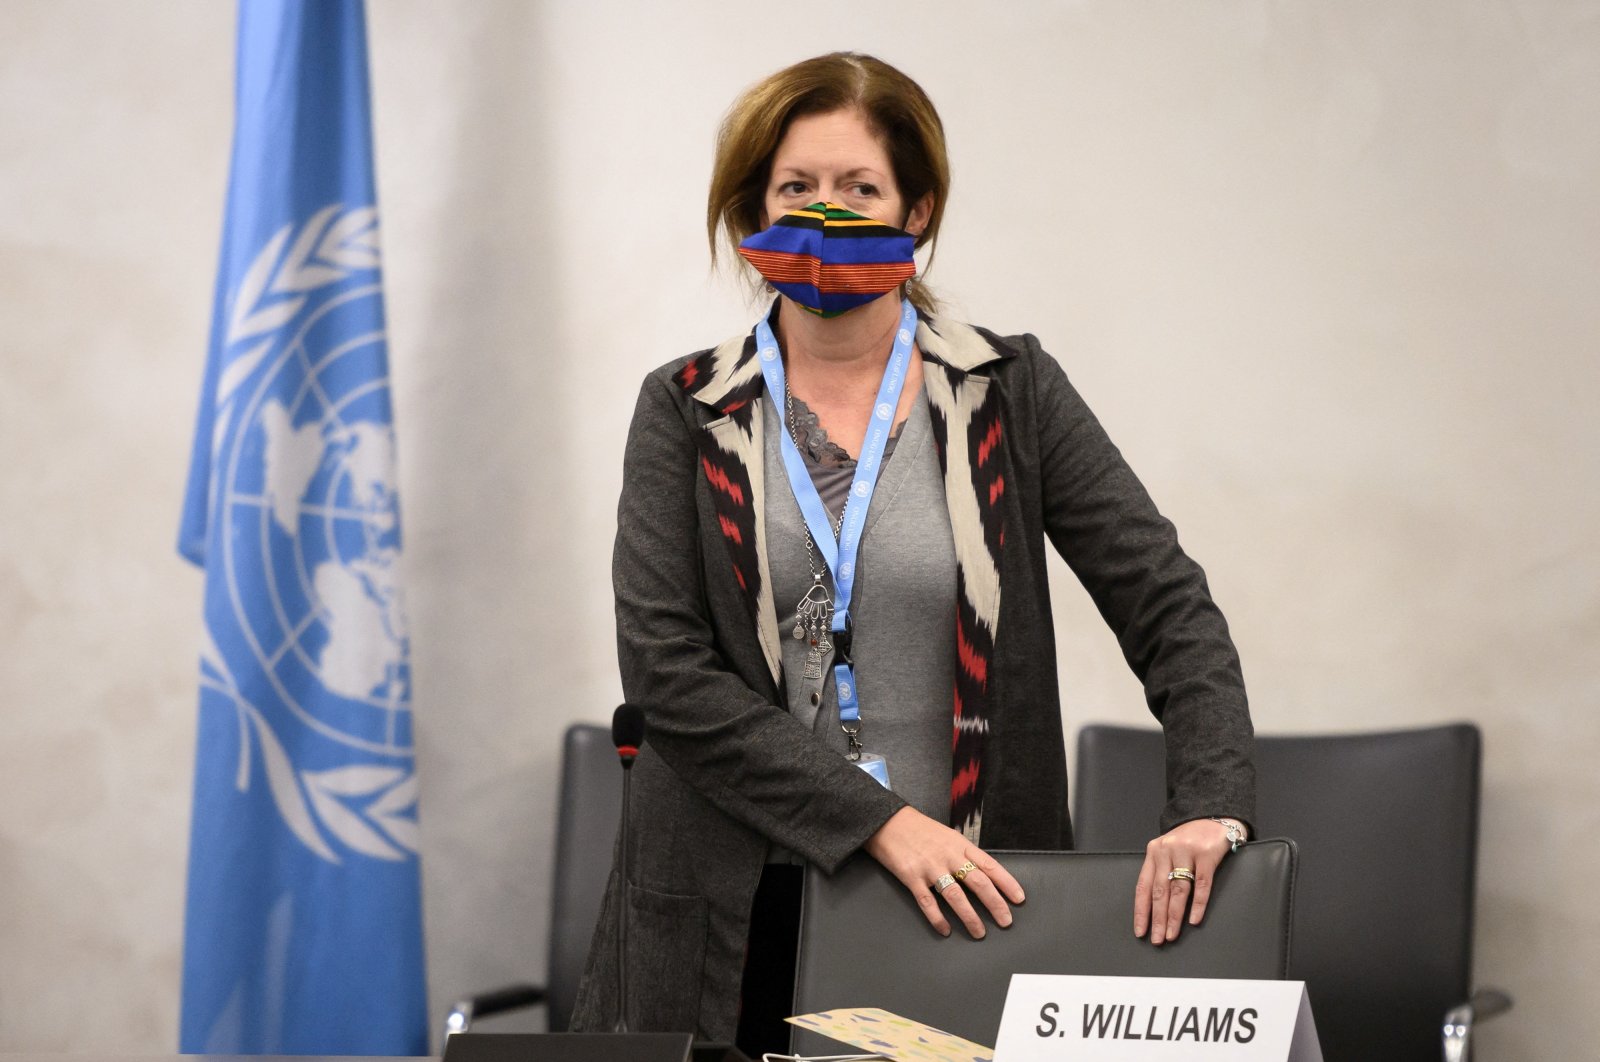 Special Representative of the U.N. Secretary-General for Political Affairs in Libya Stephanie Williams wearing a face mask attends the talks between the rival factions in the Libya conflict at the United Nations offices in Geneva, Switzerland, Oct. 20, 2020 . (Reuters File Photo)